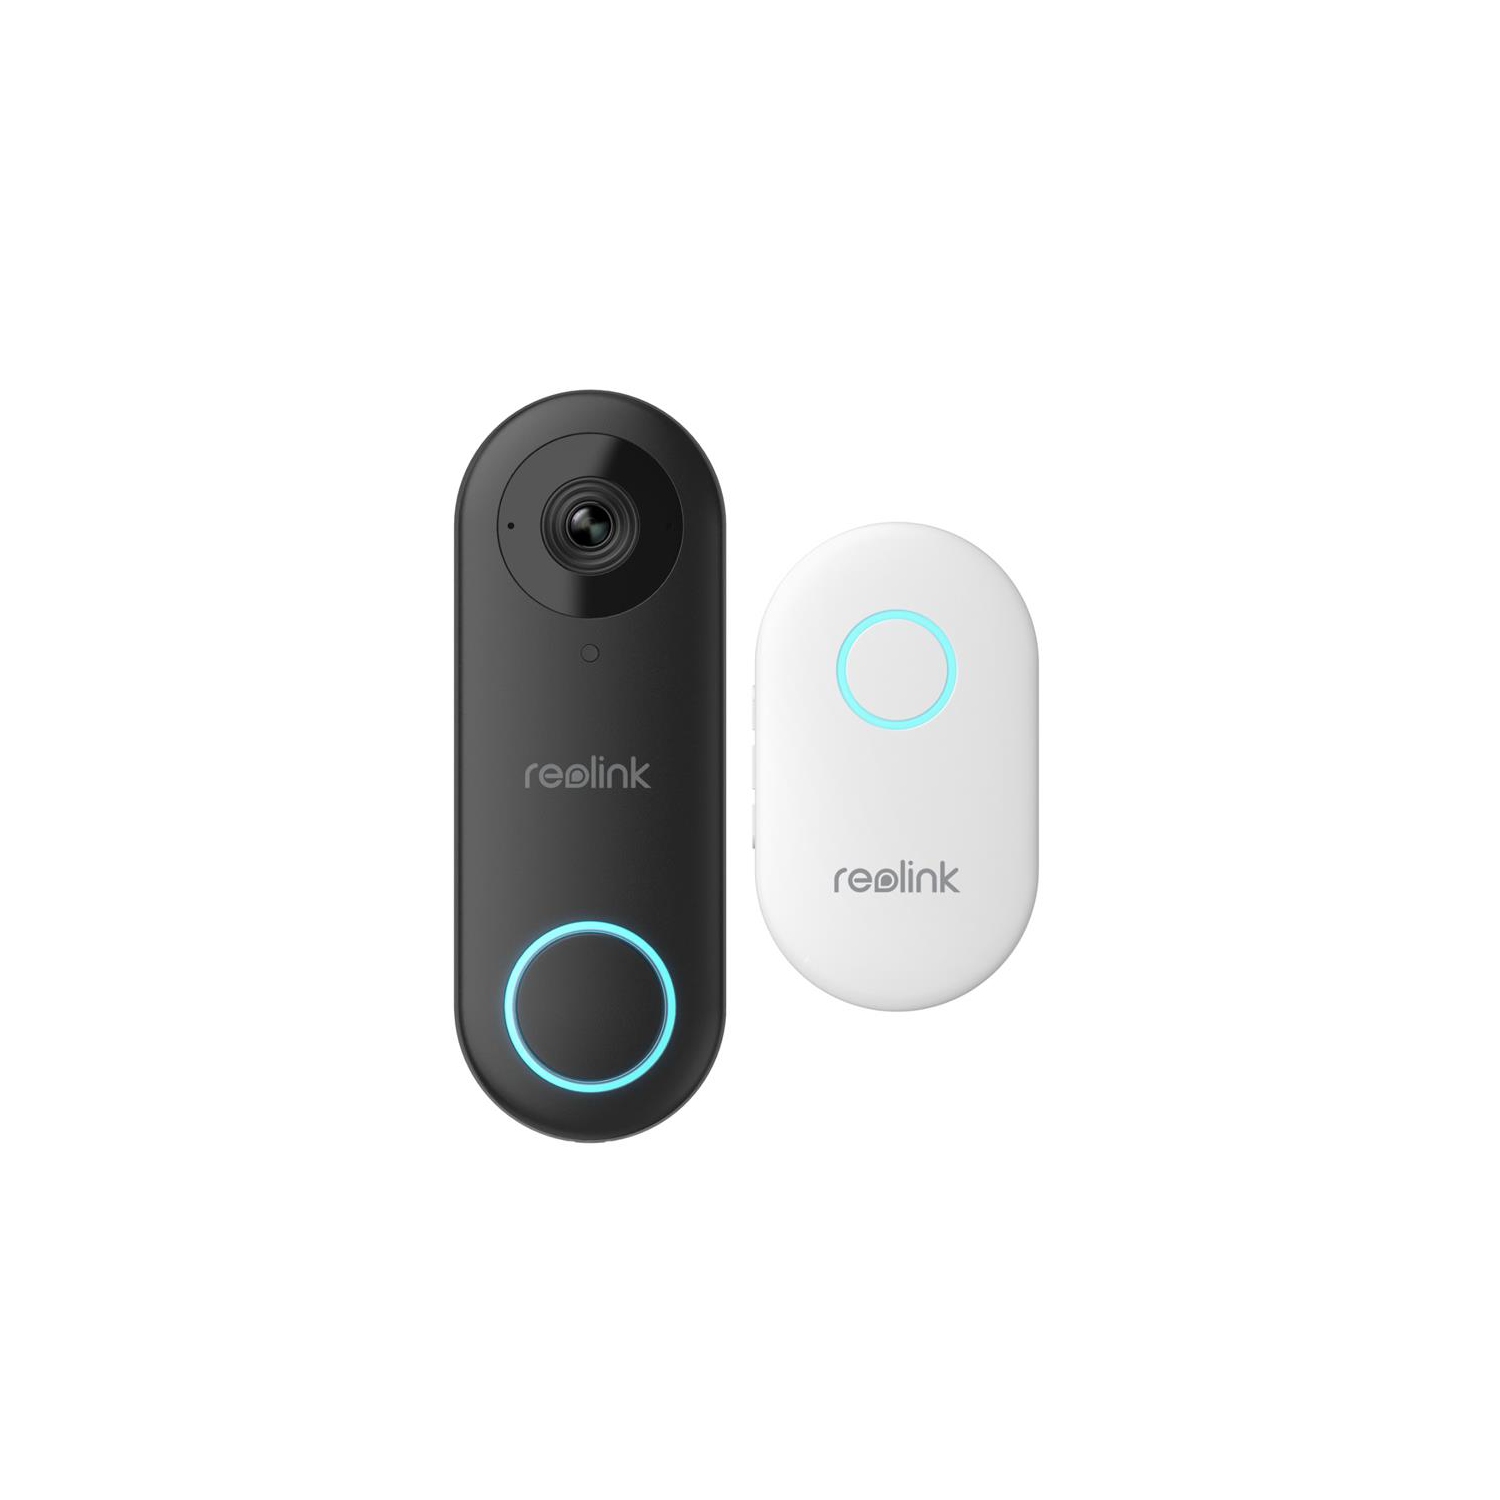 Reolink Wired Video Doorbell PoE Smart 2K+ 5MP Waterproof with Person  Detection